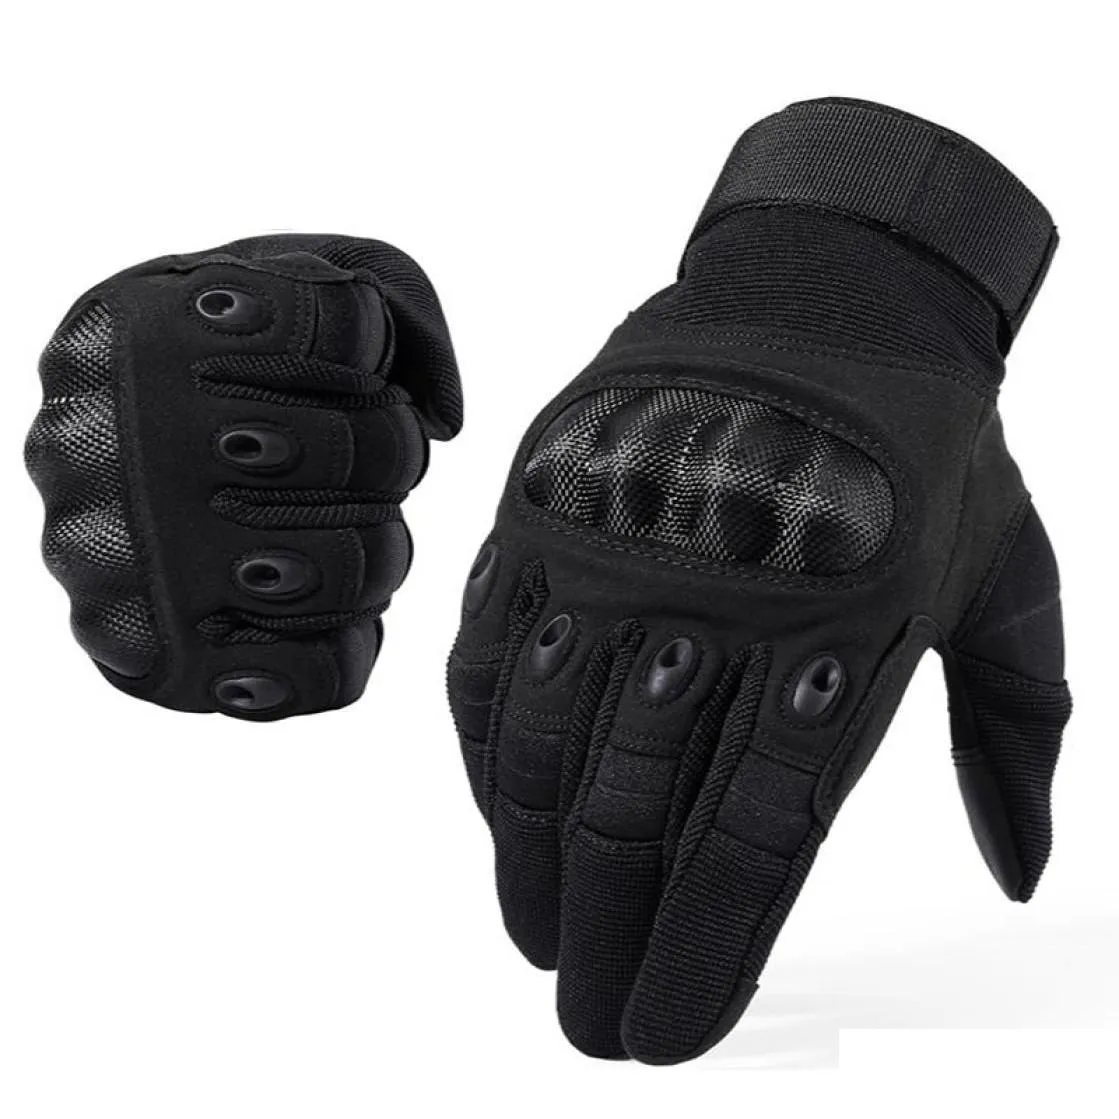 Cinq doigts Gants New Brand Tactical Army Paintball Airsoft Shoting Police Hard Knuckle Combat Fl Finger Men CJ191225522176 DHDKS